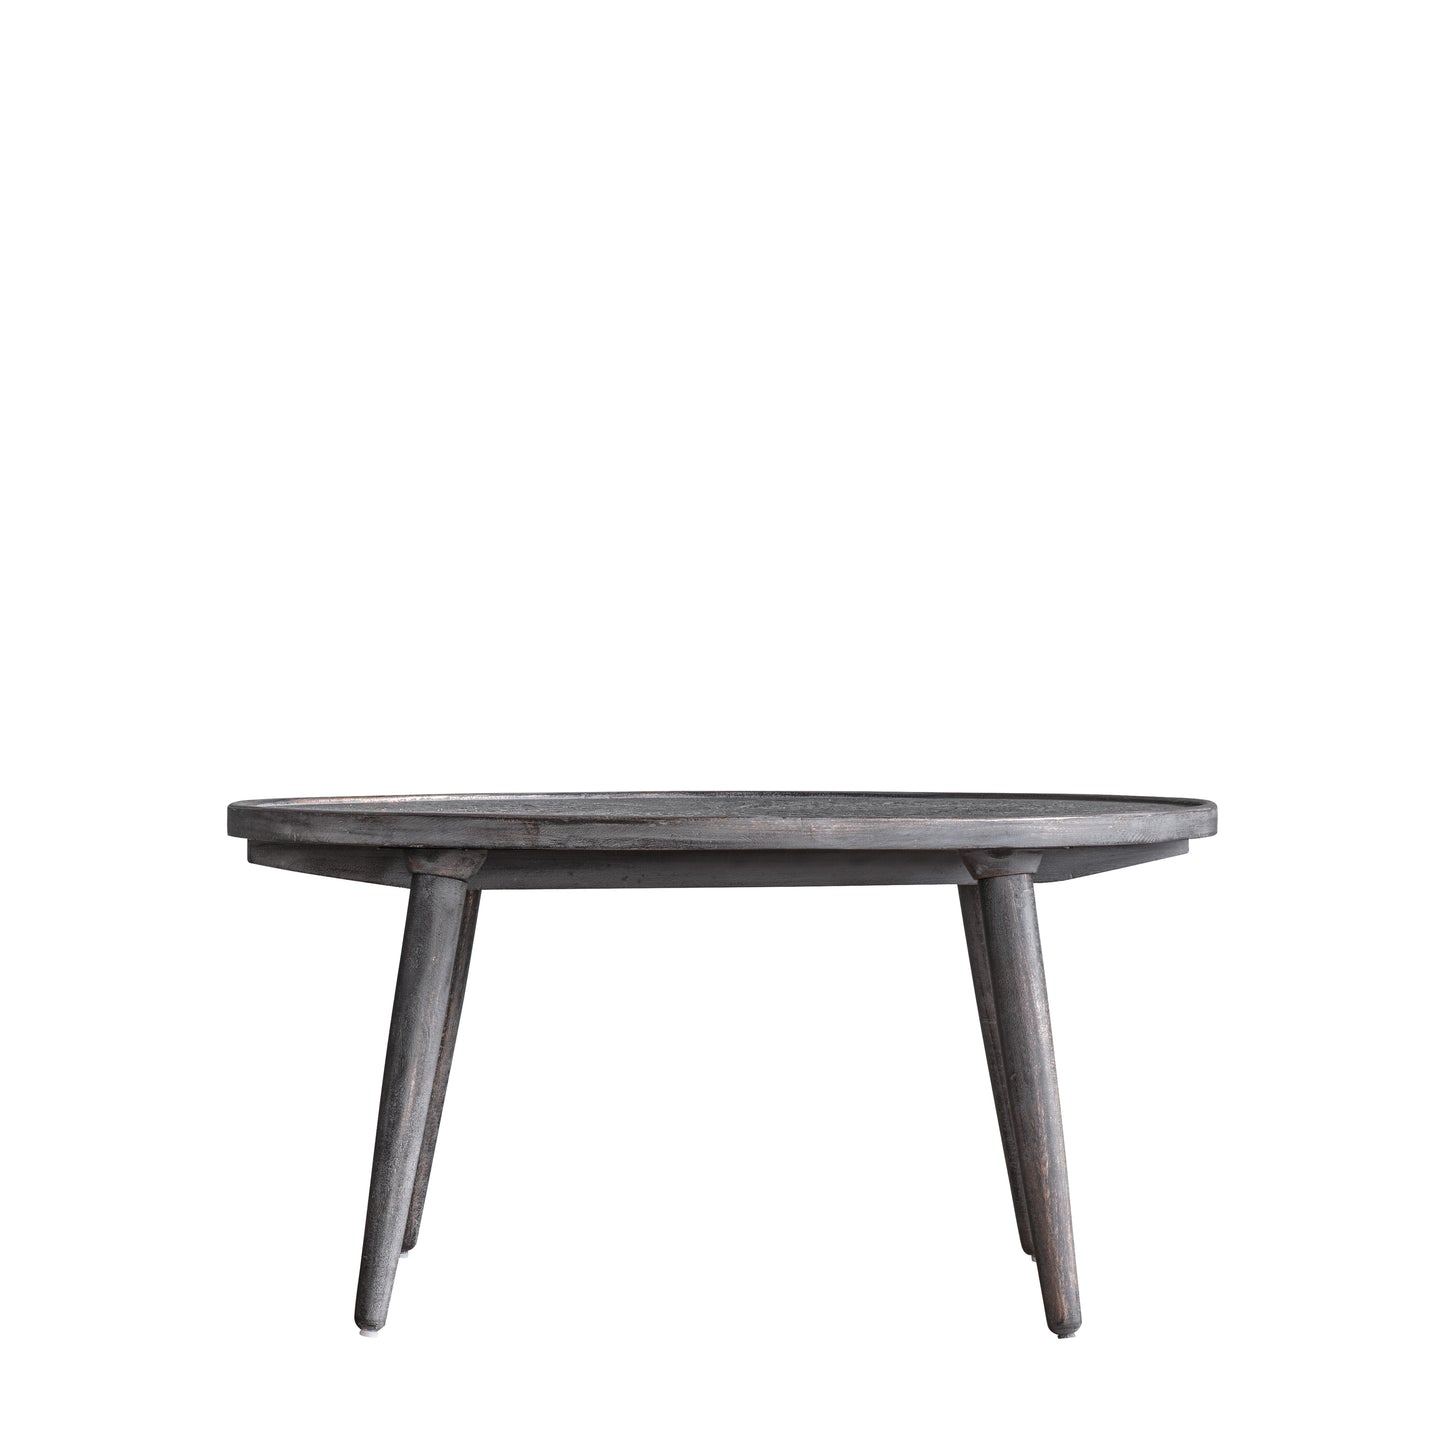 A Bantham Coffee Table Grey Black 910x910x460mm with wooden legs for home furniture and interior decor by Kikiathome.co.uk.